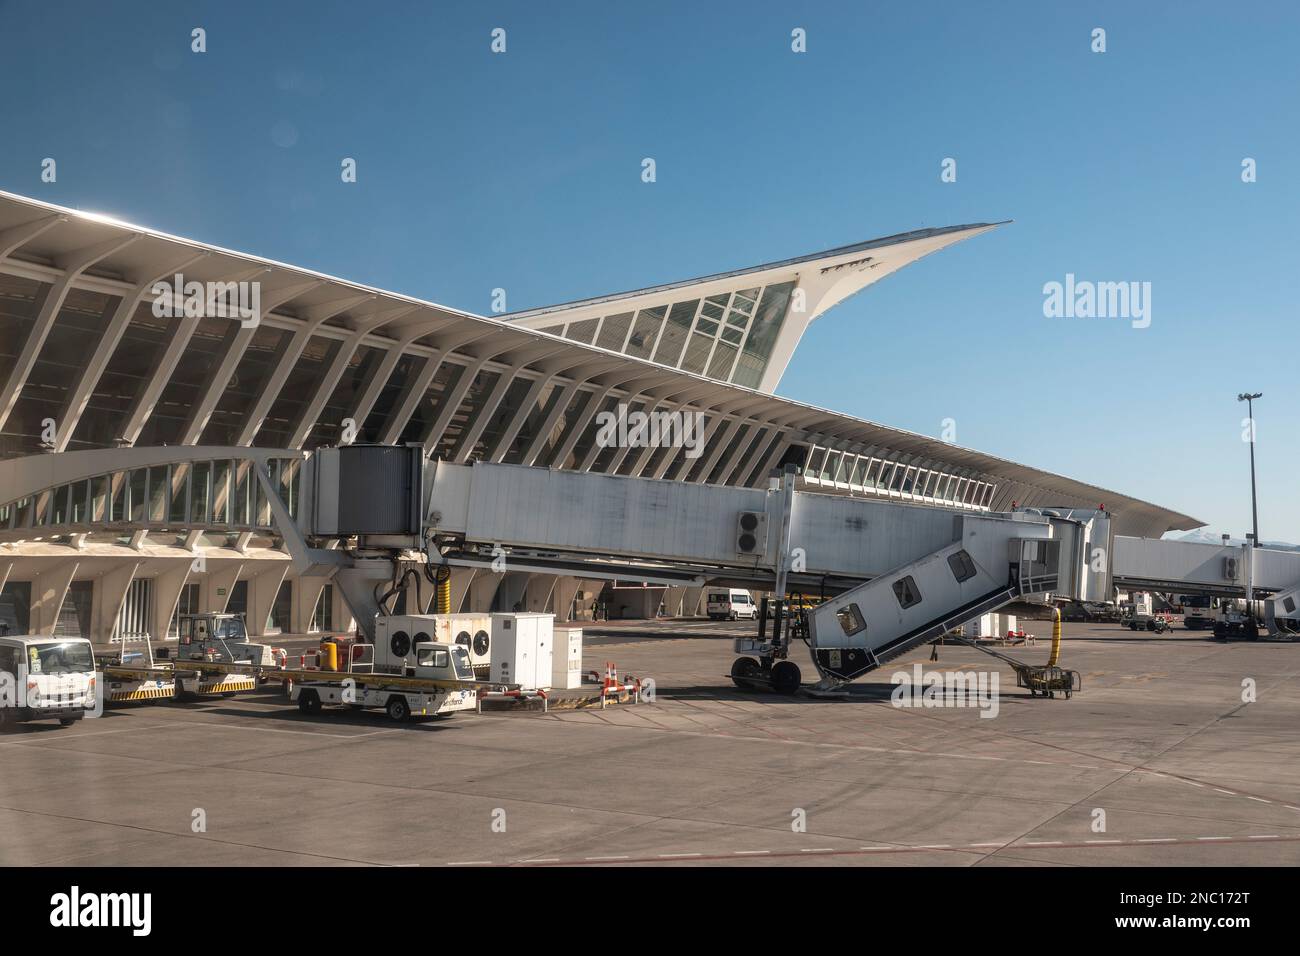 Image of the Loiu airport in Bilbao. Stock Photo